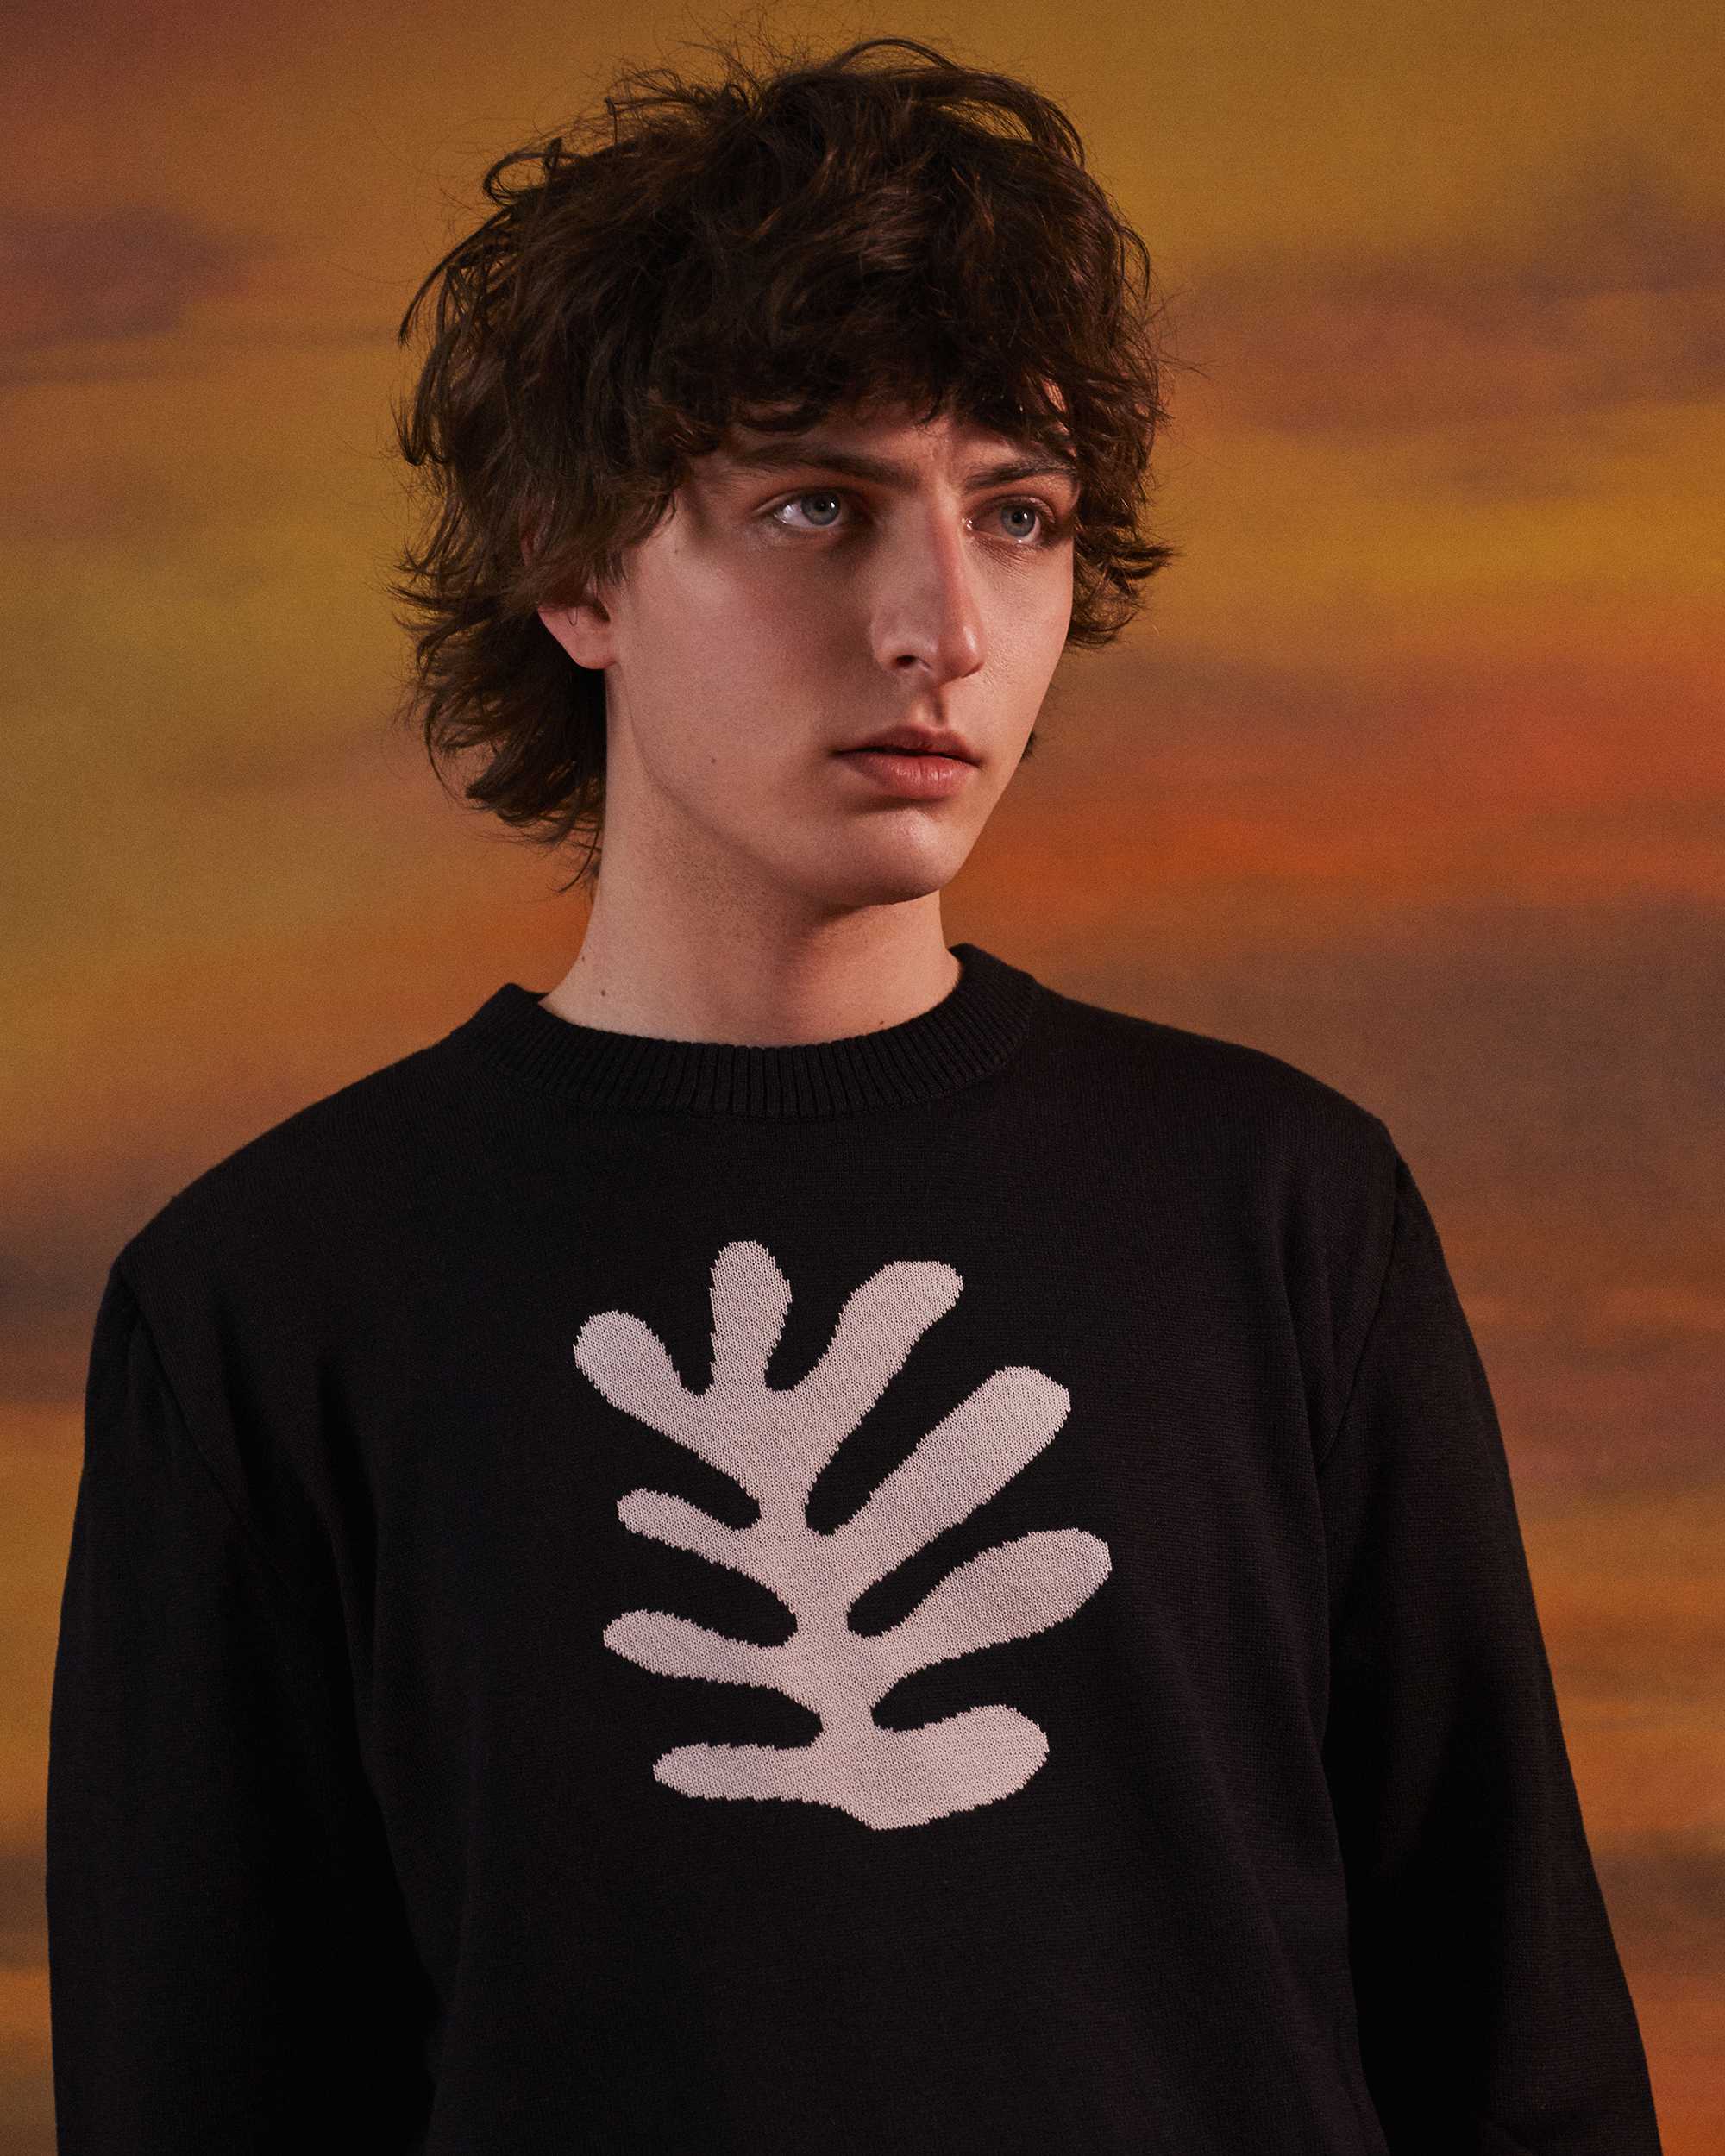 Man posing infront behind a sunset in a black knitted jumper with a white organic shape on